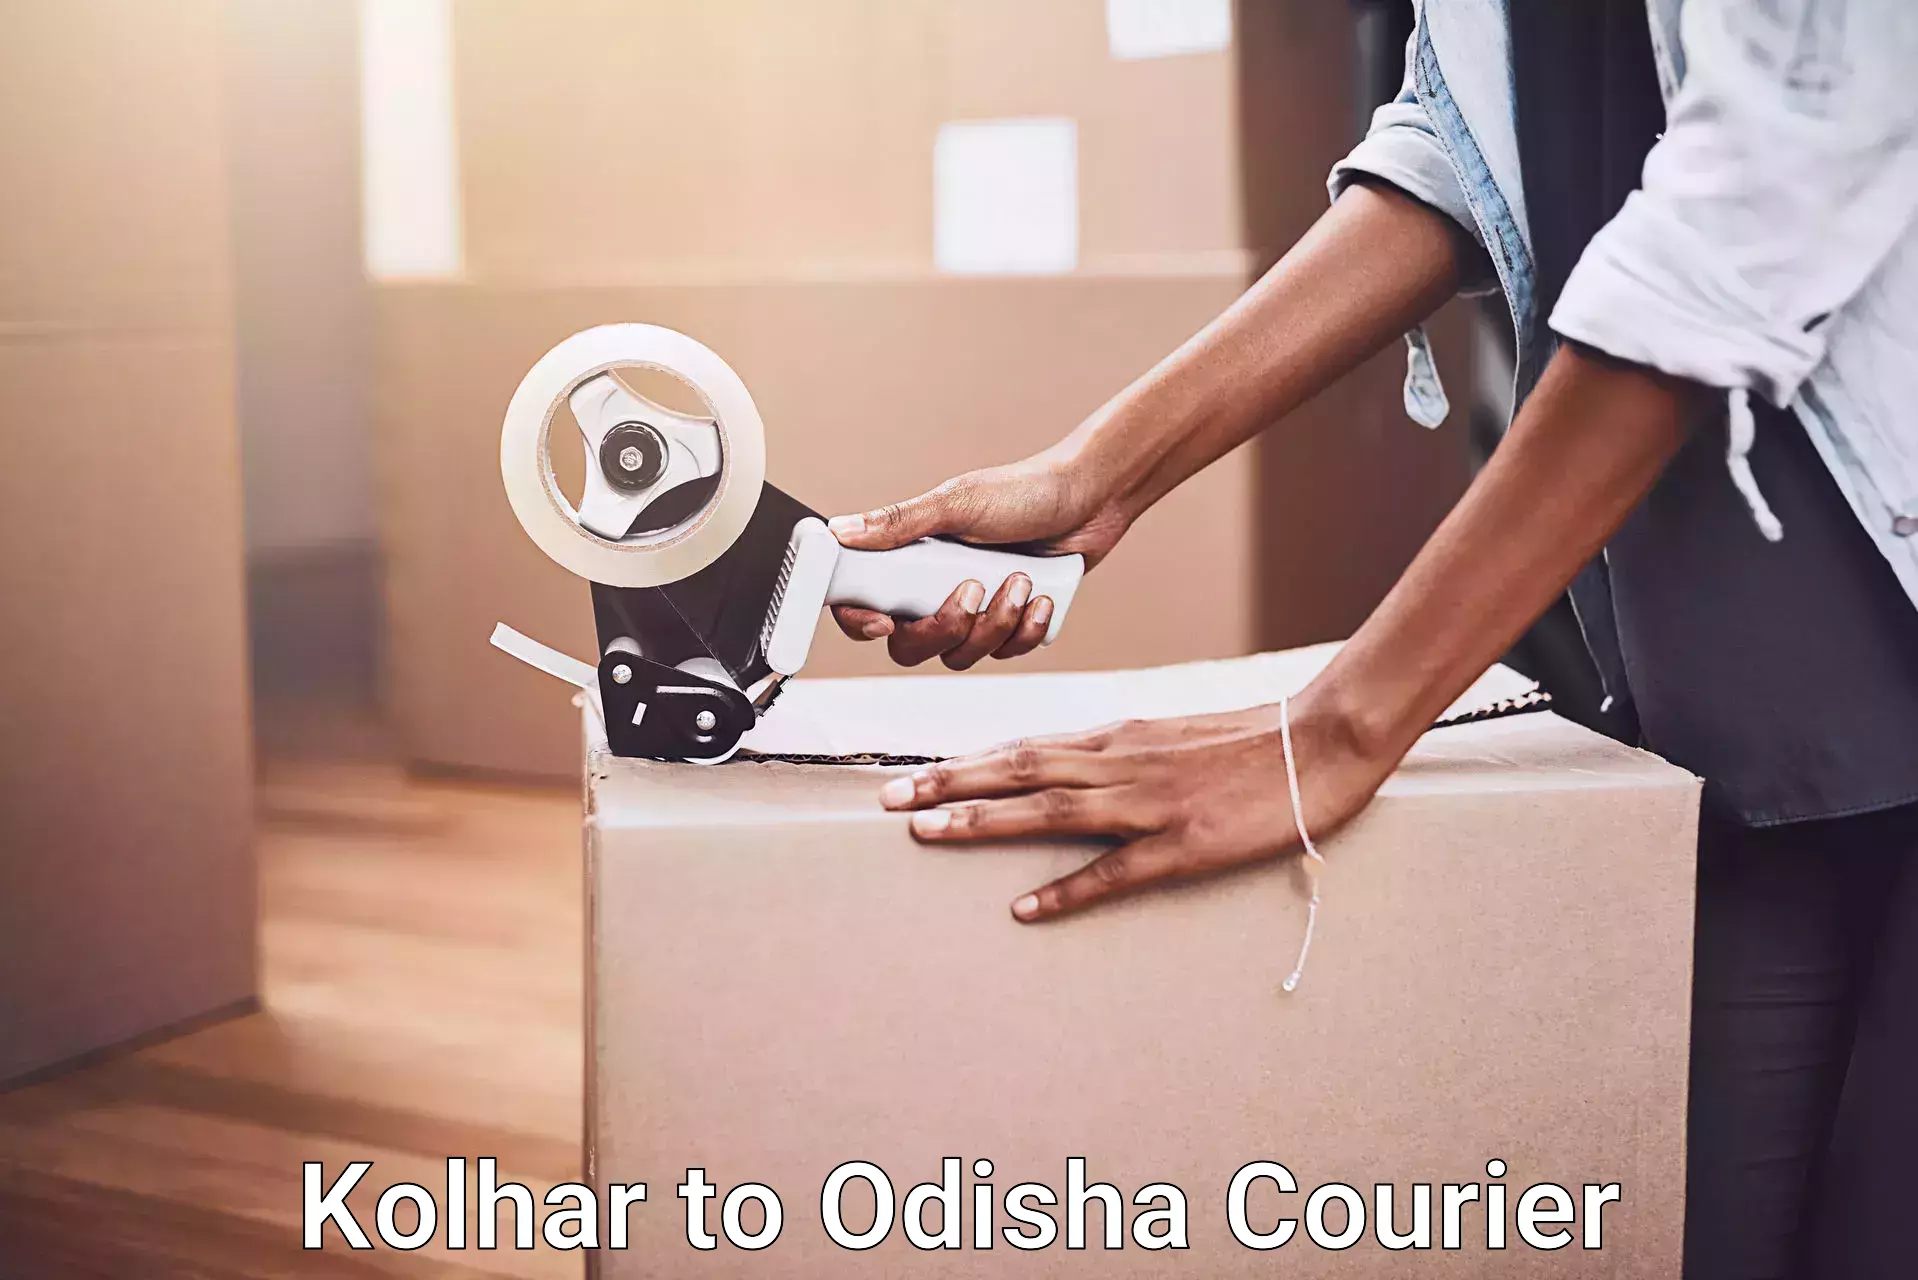 Professional movers Kolhar to Dhamanagar